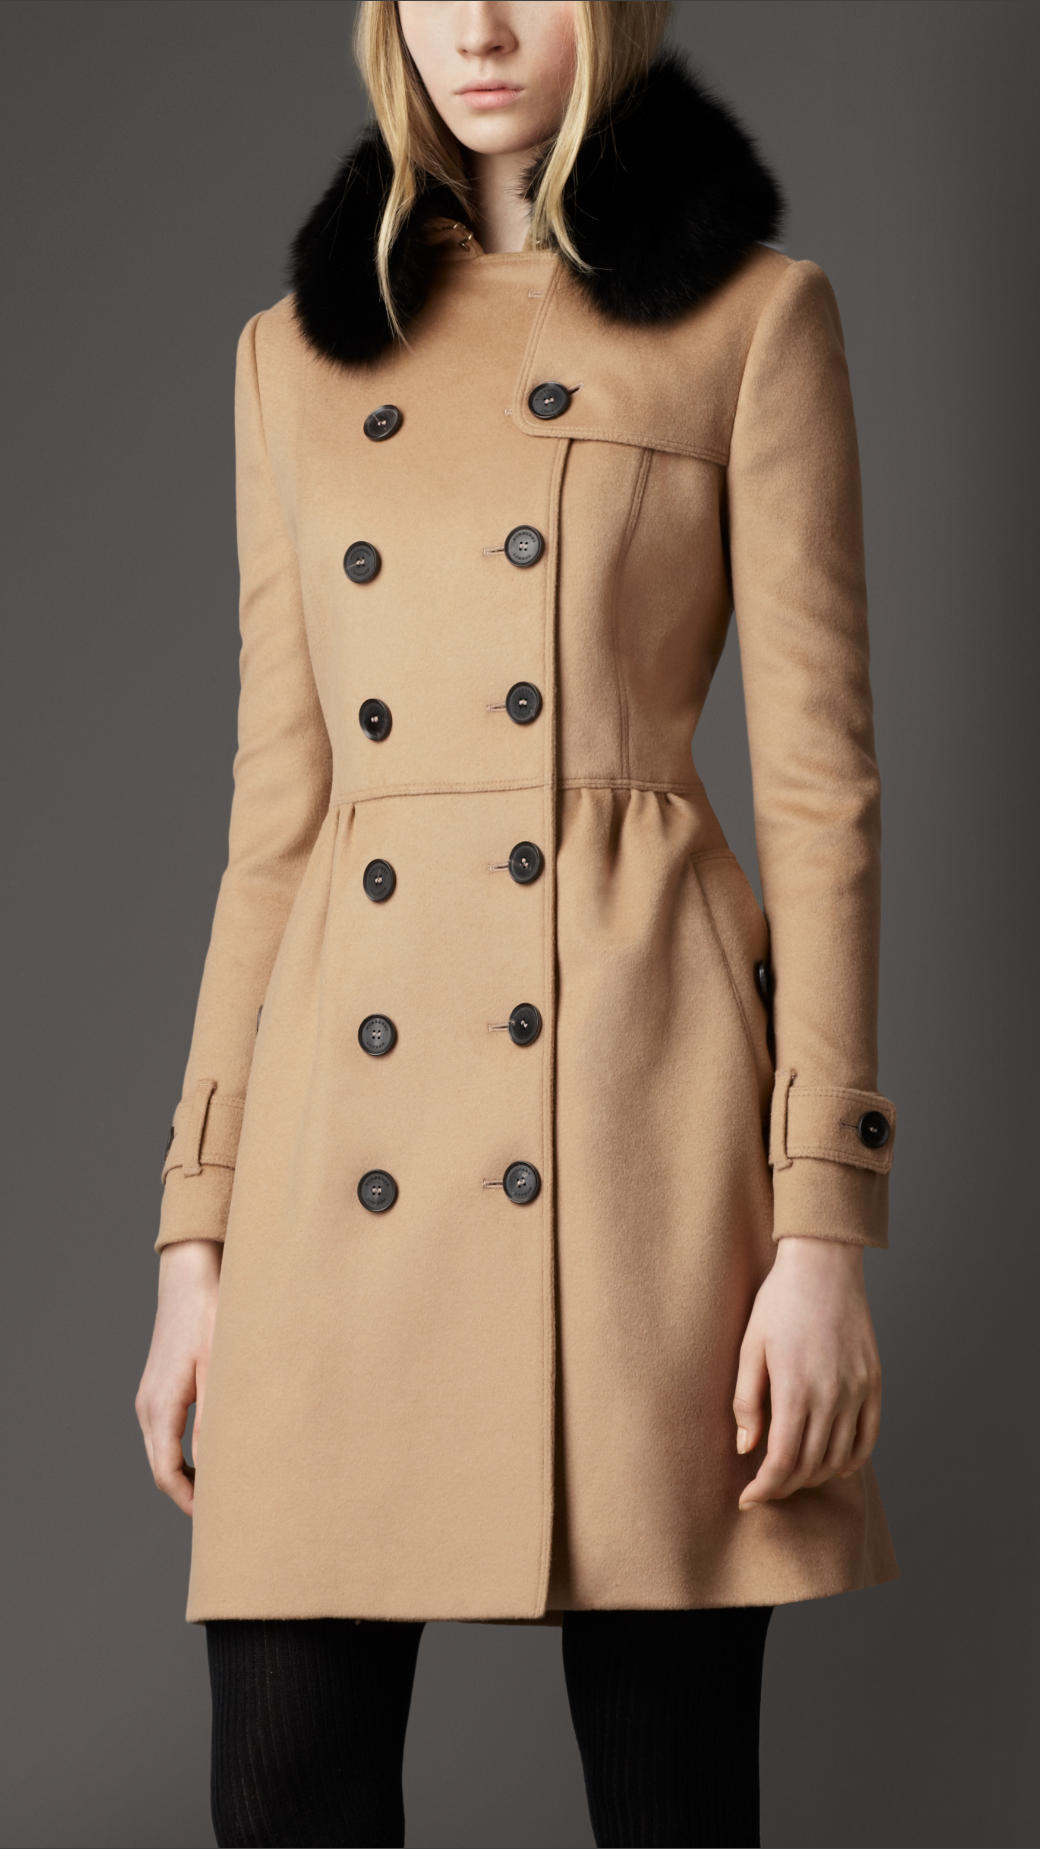 Burberry Midlength Wool Cashmere Fur Collar Trench Coat in Camel (Natural)  - Lyst